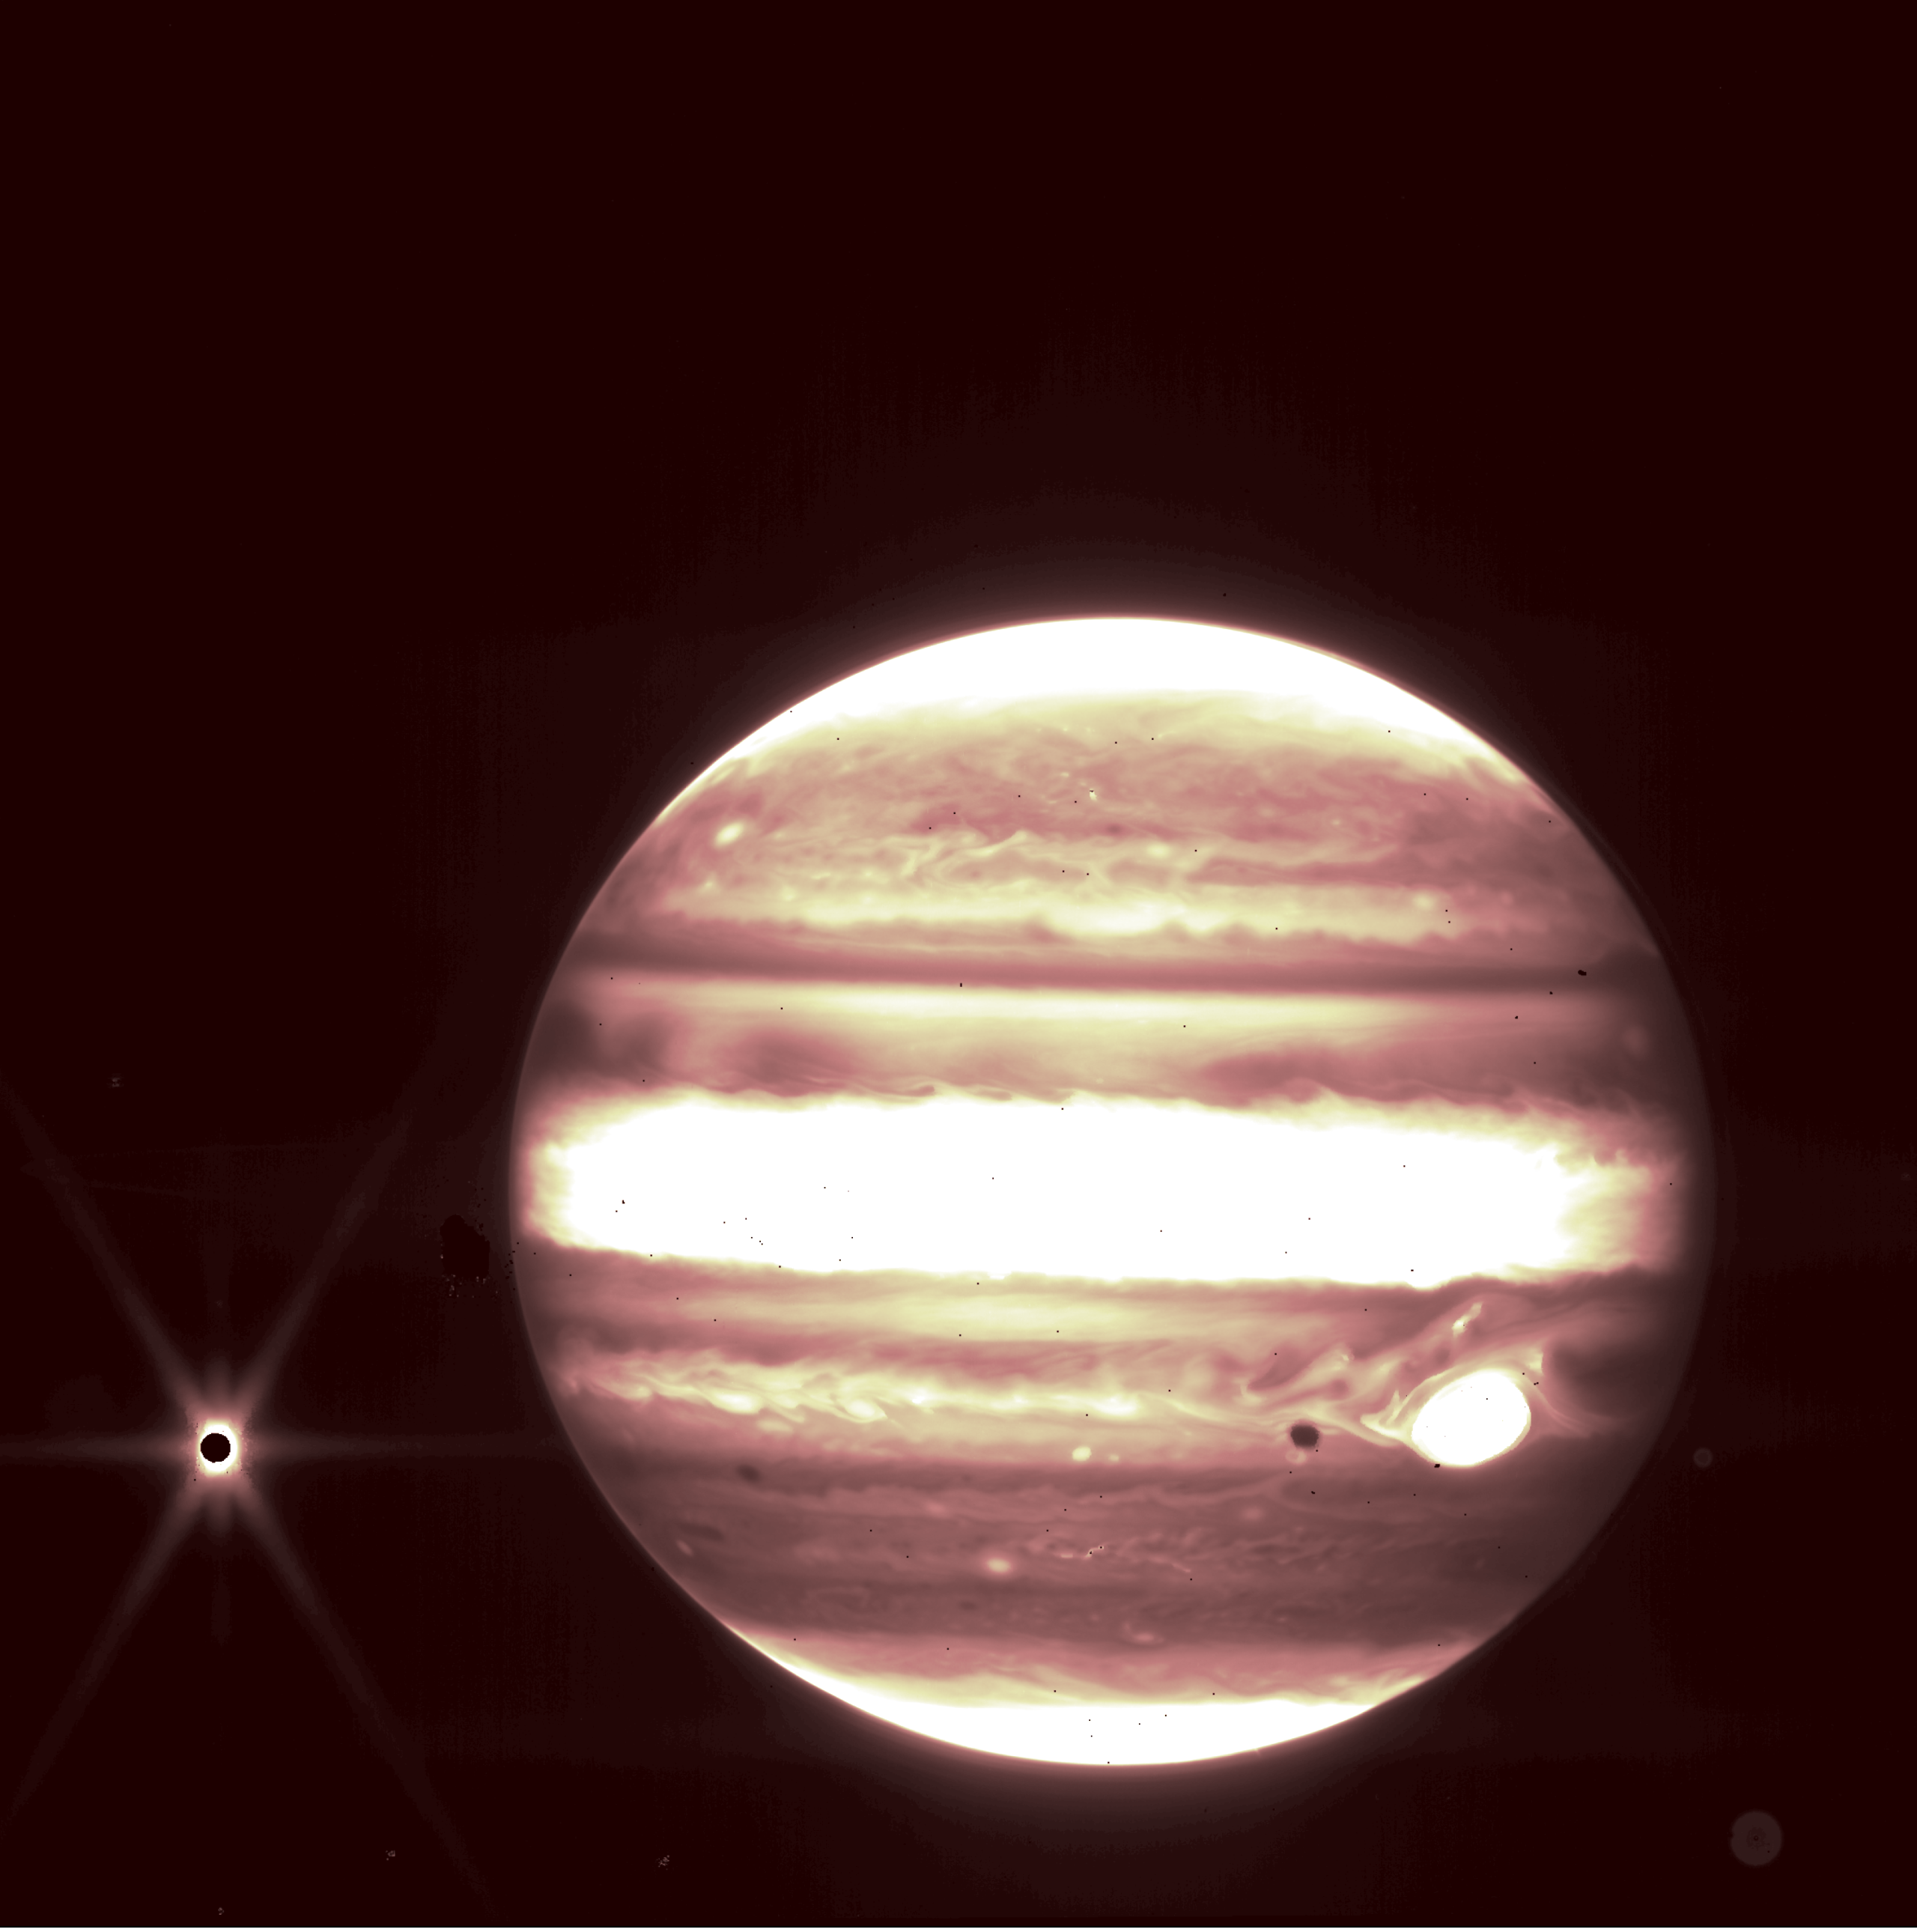 Jupiter, center, and its moon Europa, left, are viewed through the 2.12 micron NIRCam filter on the James Webb Space Telescope. Credits: NASA, ESA, CSA, and B. Holler and J. Stansberry (STScI).